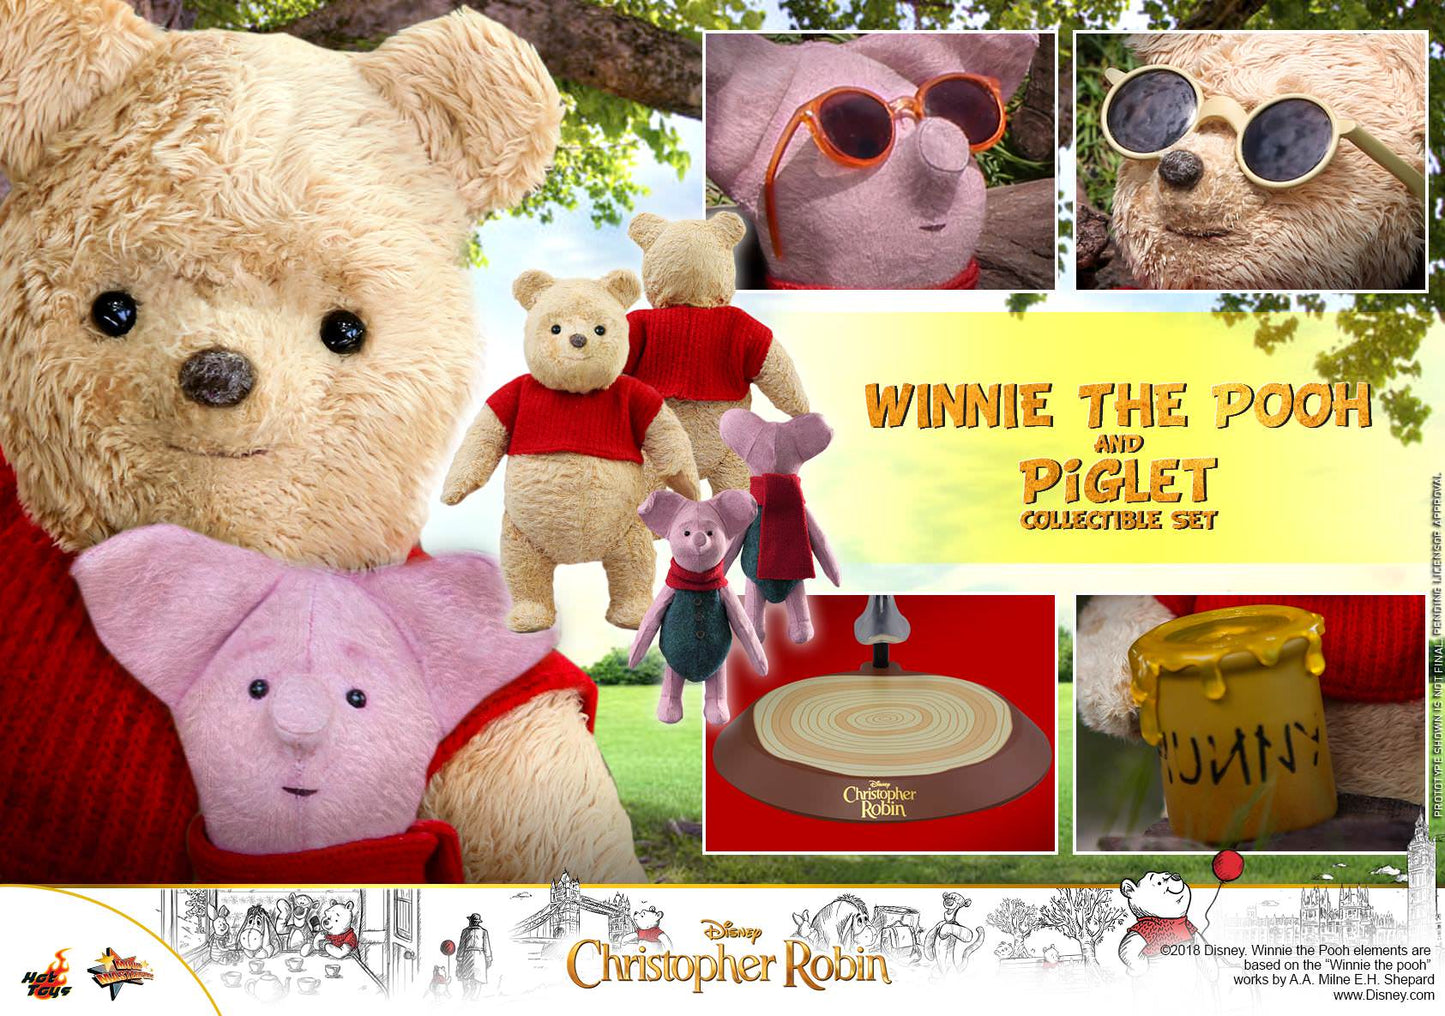 Winnie the Pooh & Piglet 1/6 - Christopher Robin Hot Toys